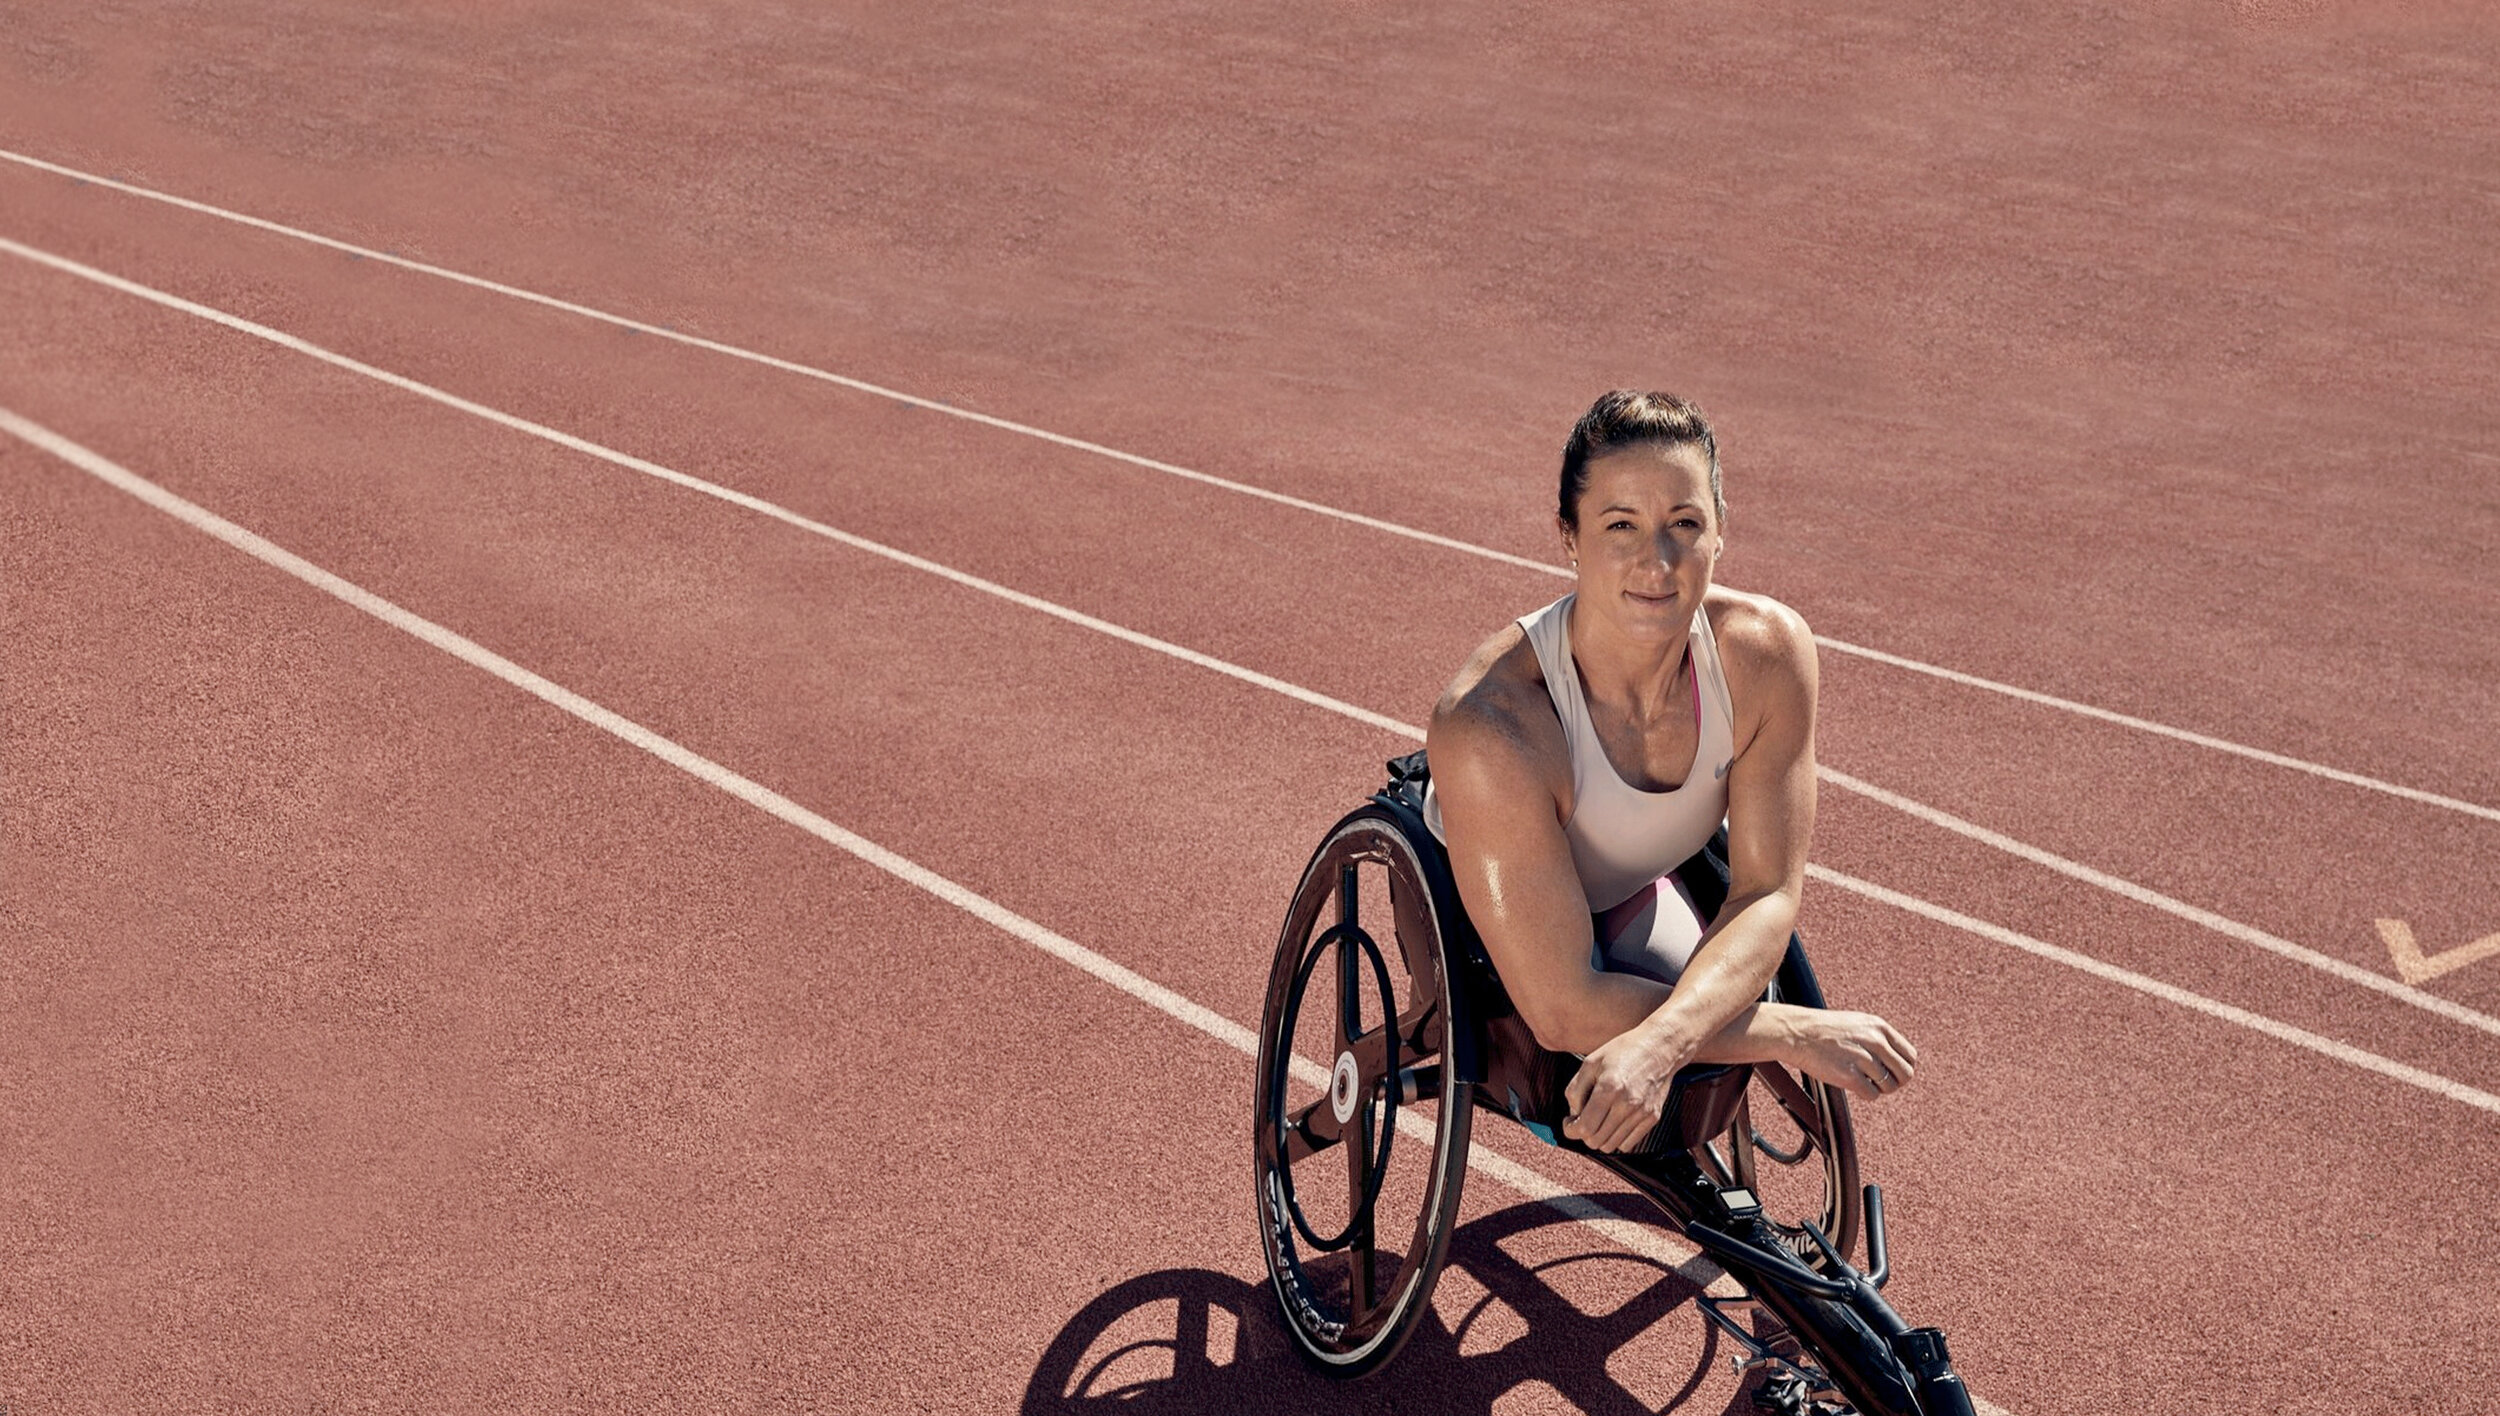 Tatyana McFadden sitting in a racing wheelchair on a track looking up at camera.